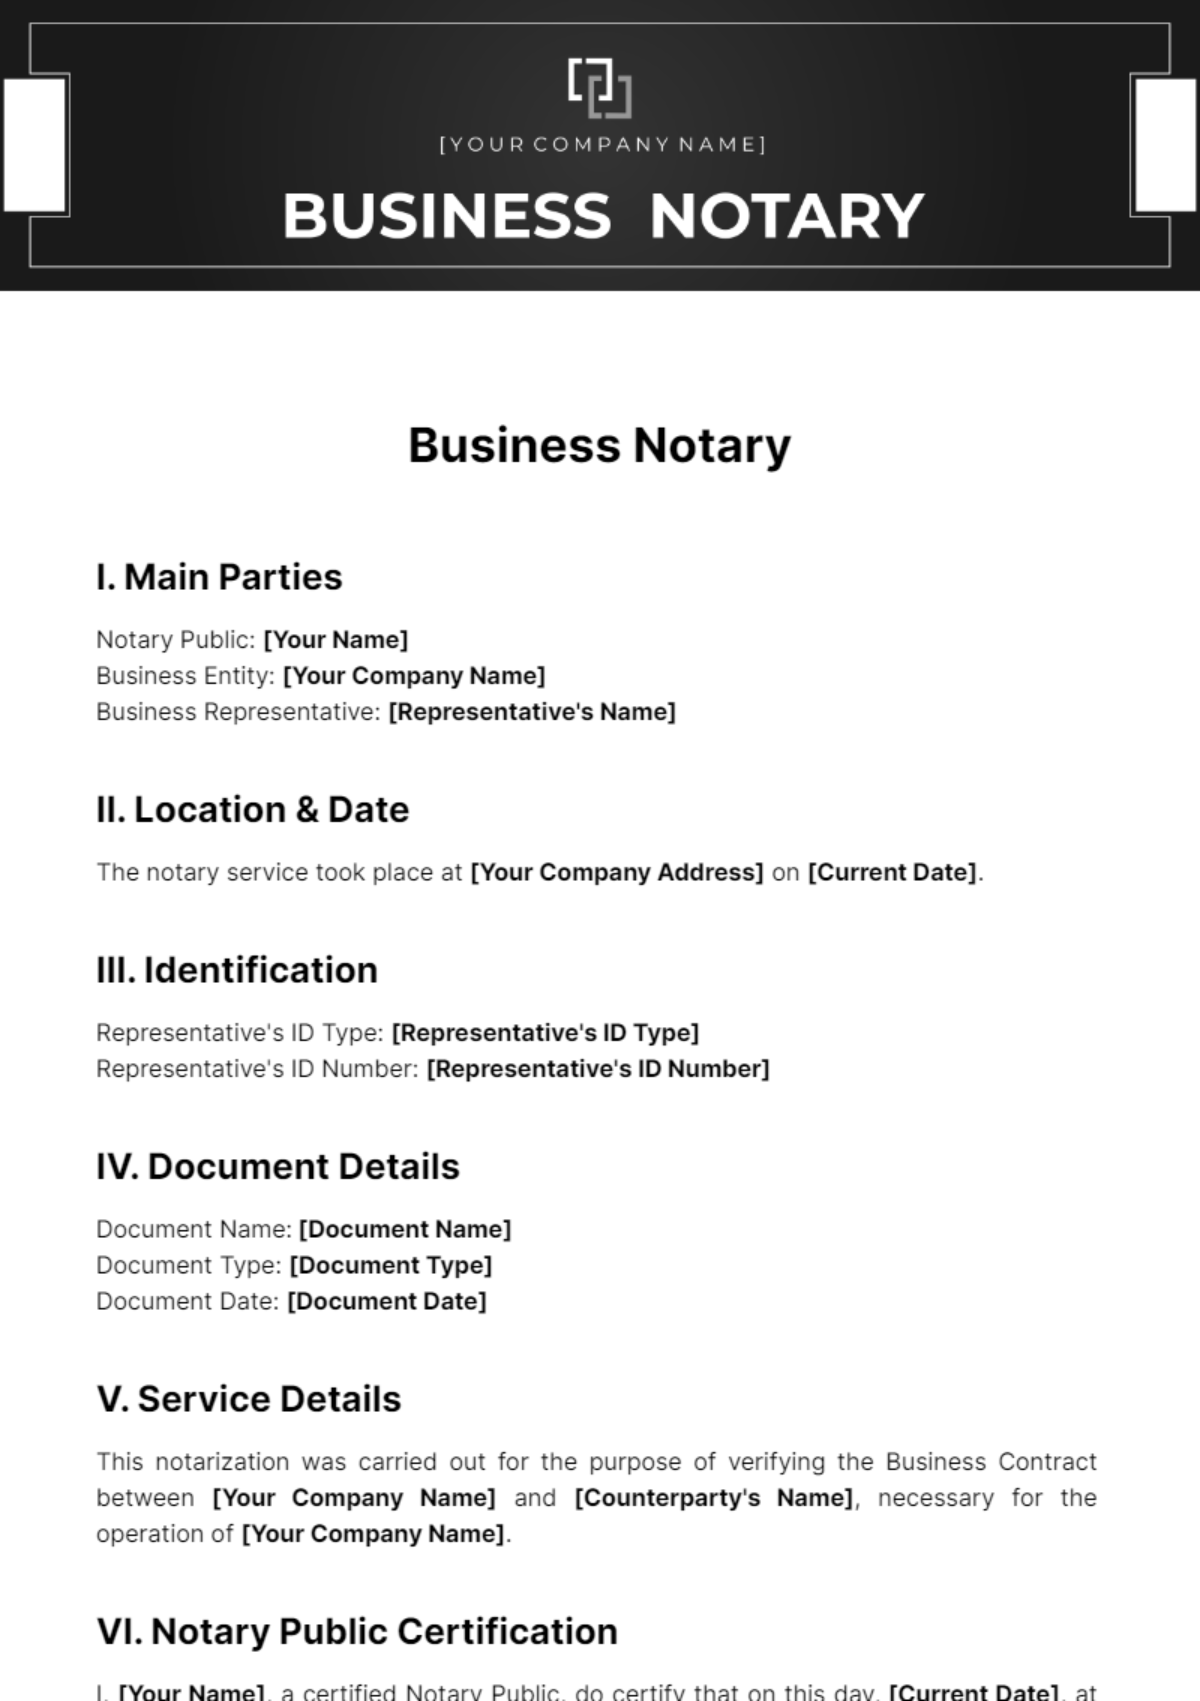 Business Notary Template